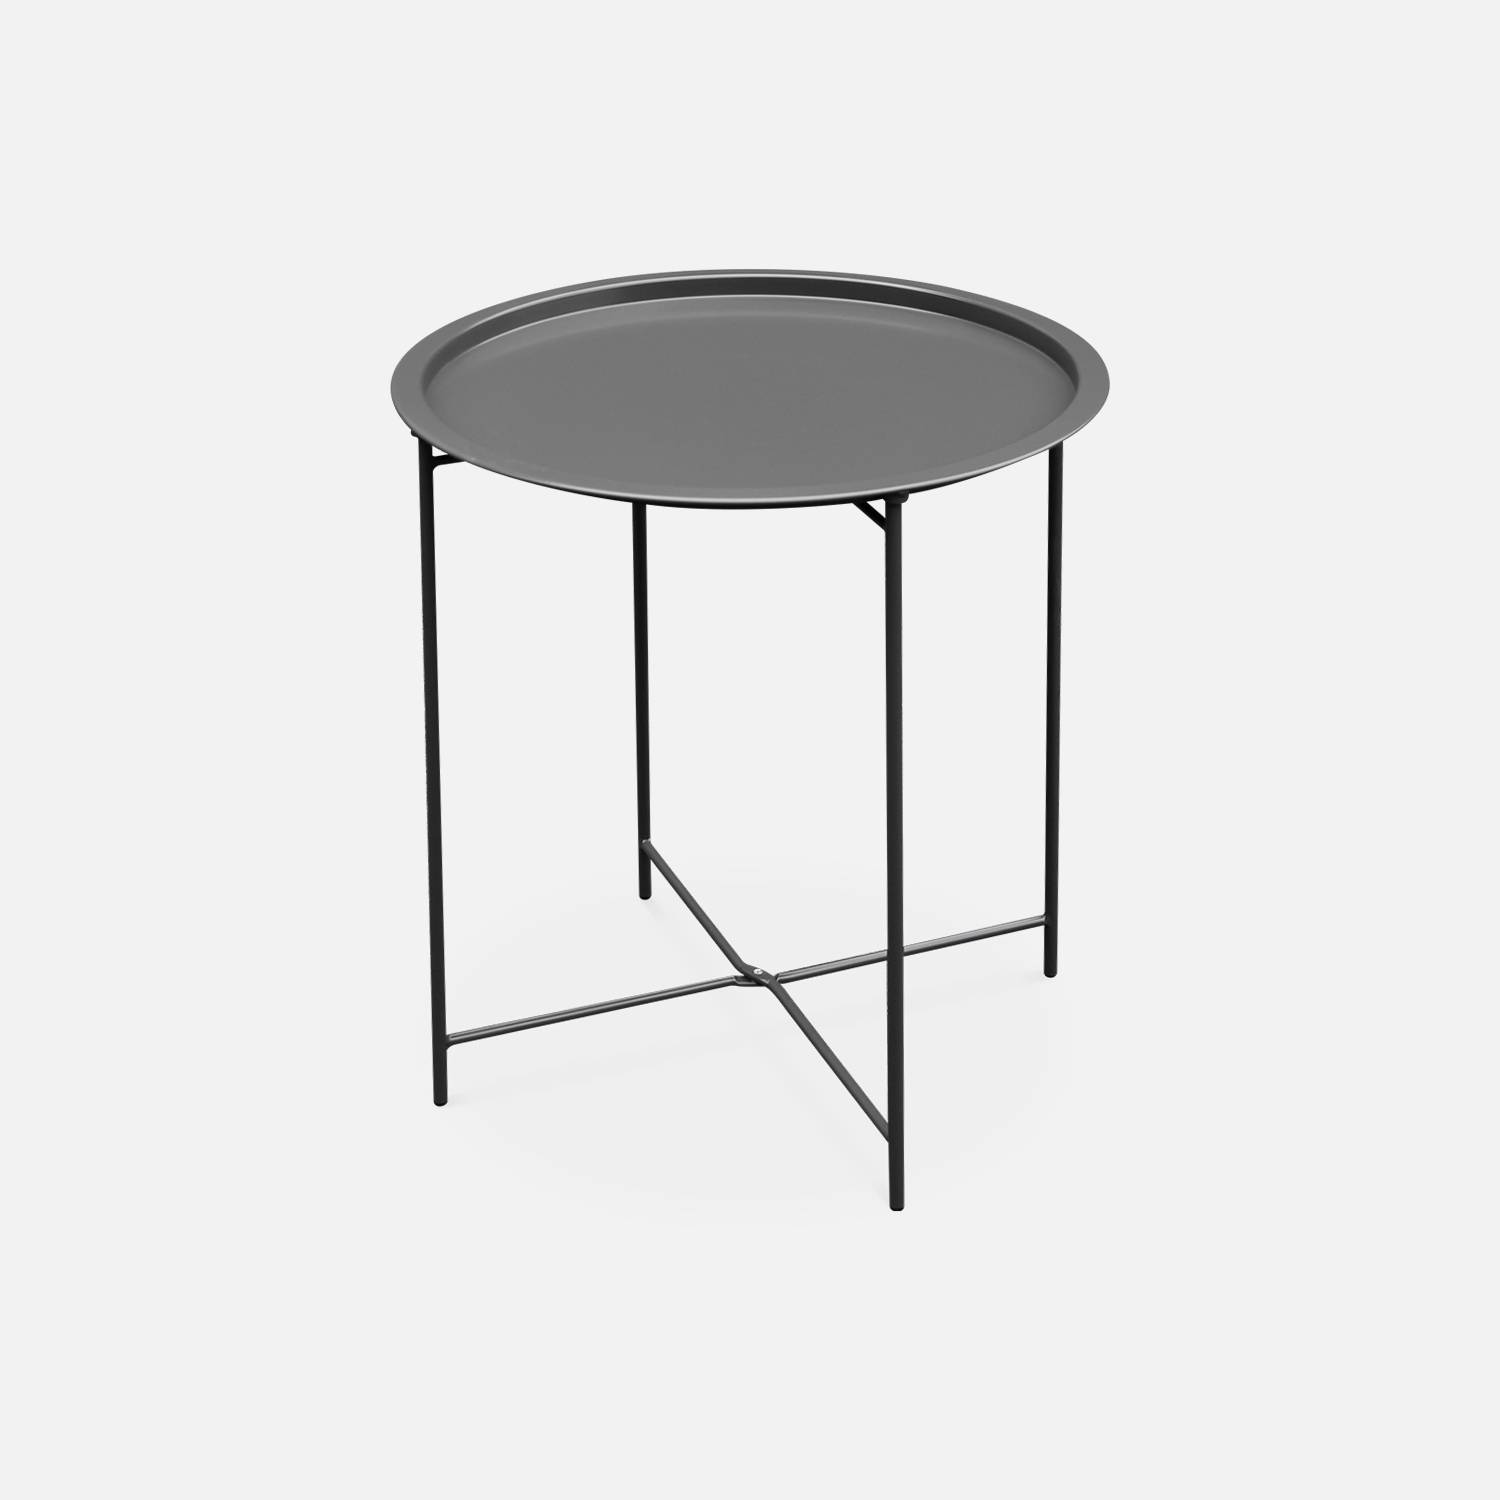 Side table Alexia Ø46cm in powder coated steel, Anthracite grey | sweeek